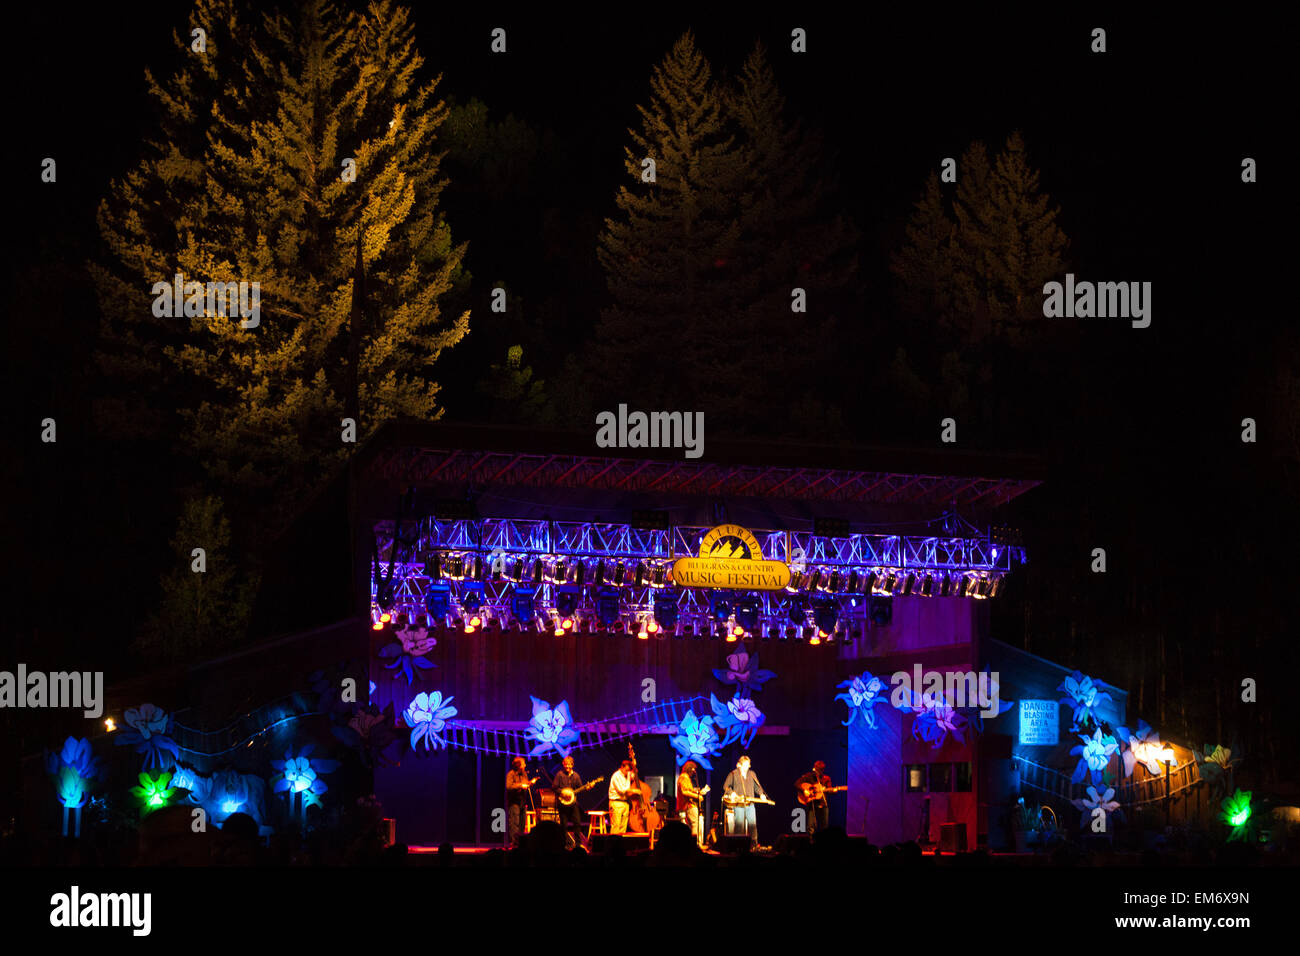 Nighttime performance in Town Park during the Telluride Bluegrass Festival in Telluride, Colorado. Stock Photo